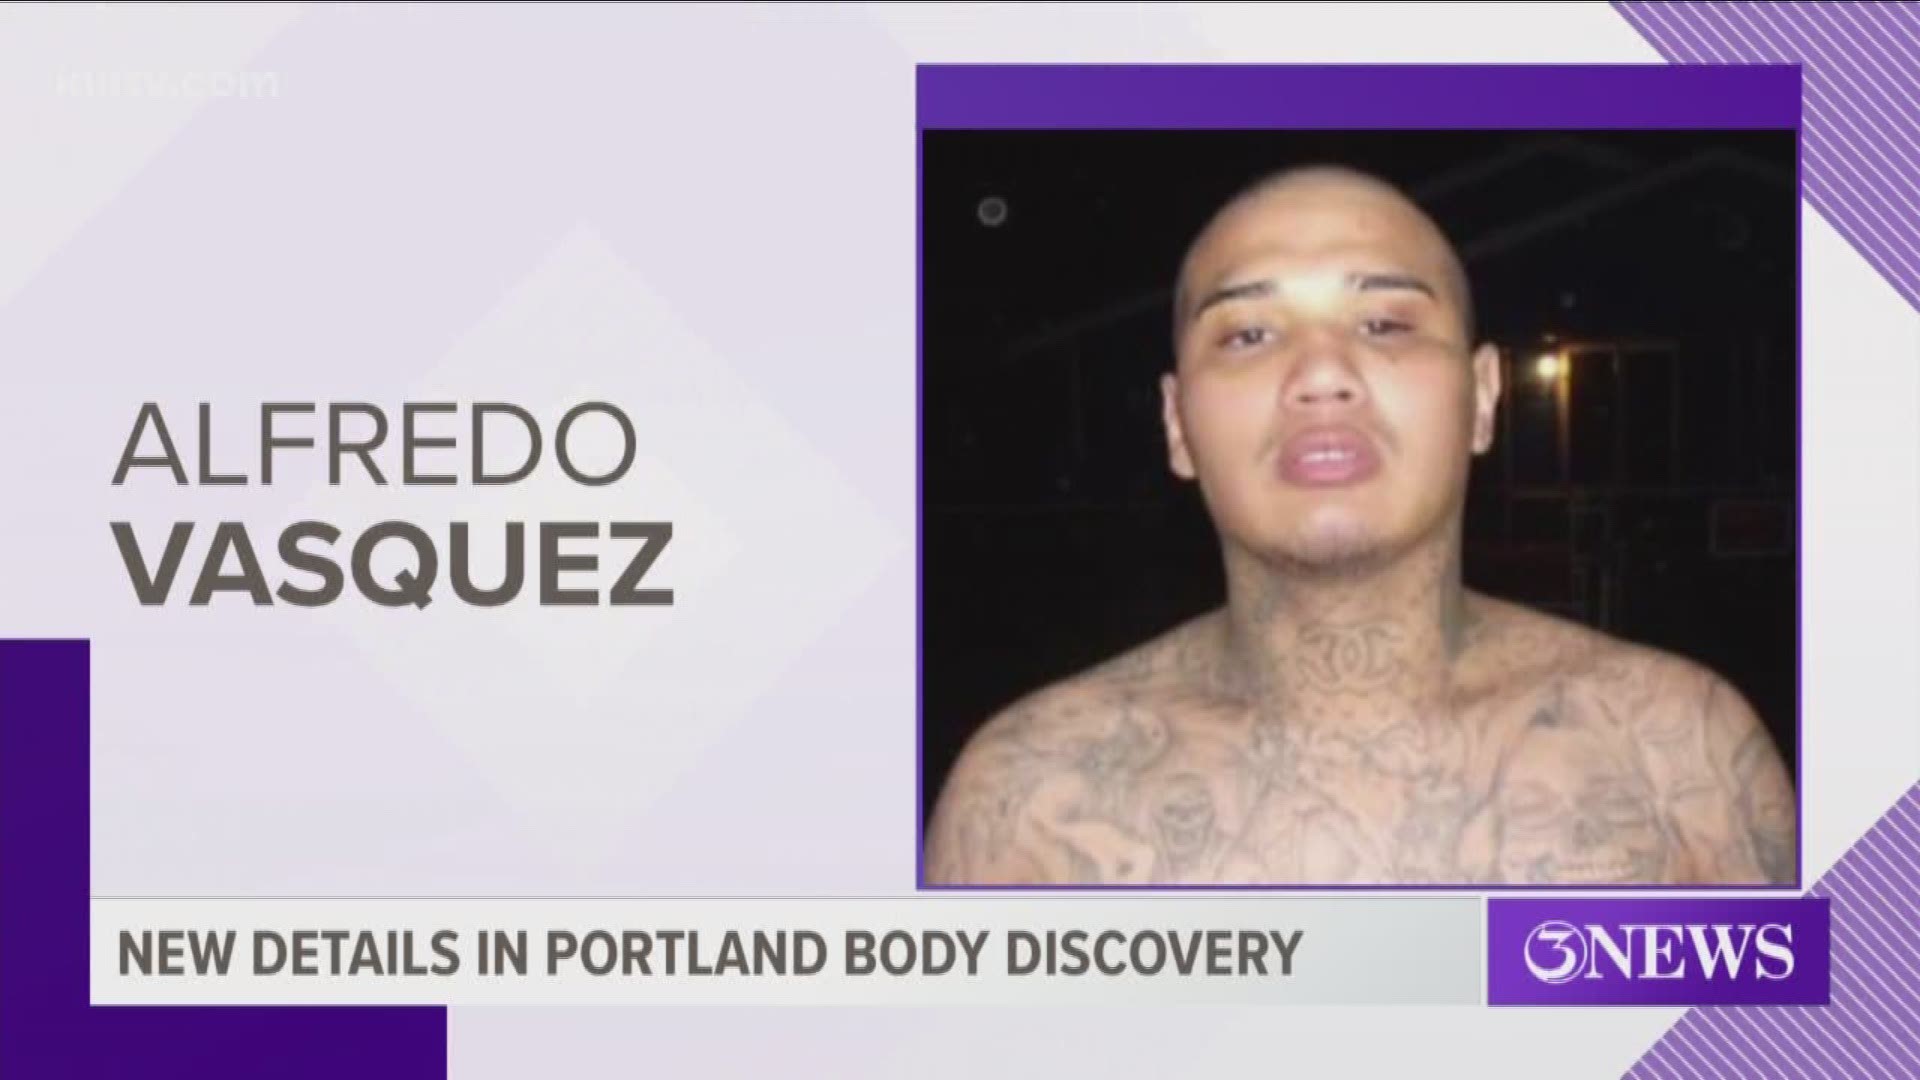 The San Patricio County Sheriff released new details Thursday in connection with the death of 27-year-old Alfredo Vasquez, whose body was found after being dumped in a creek near Portland, Texas.